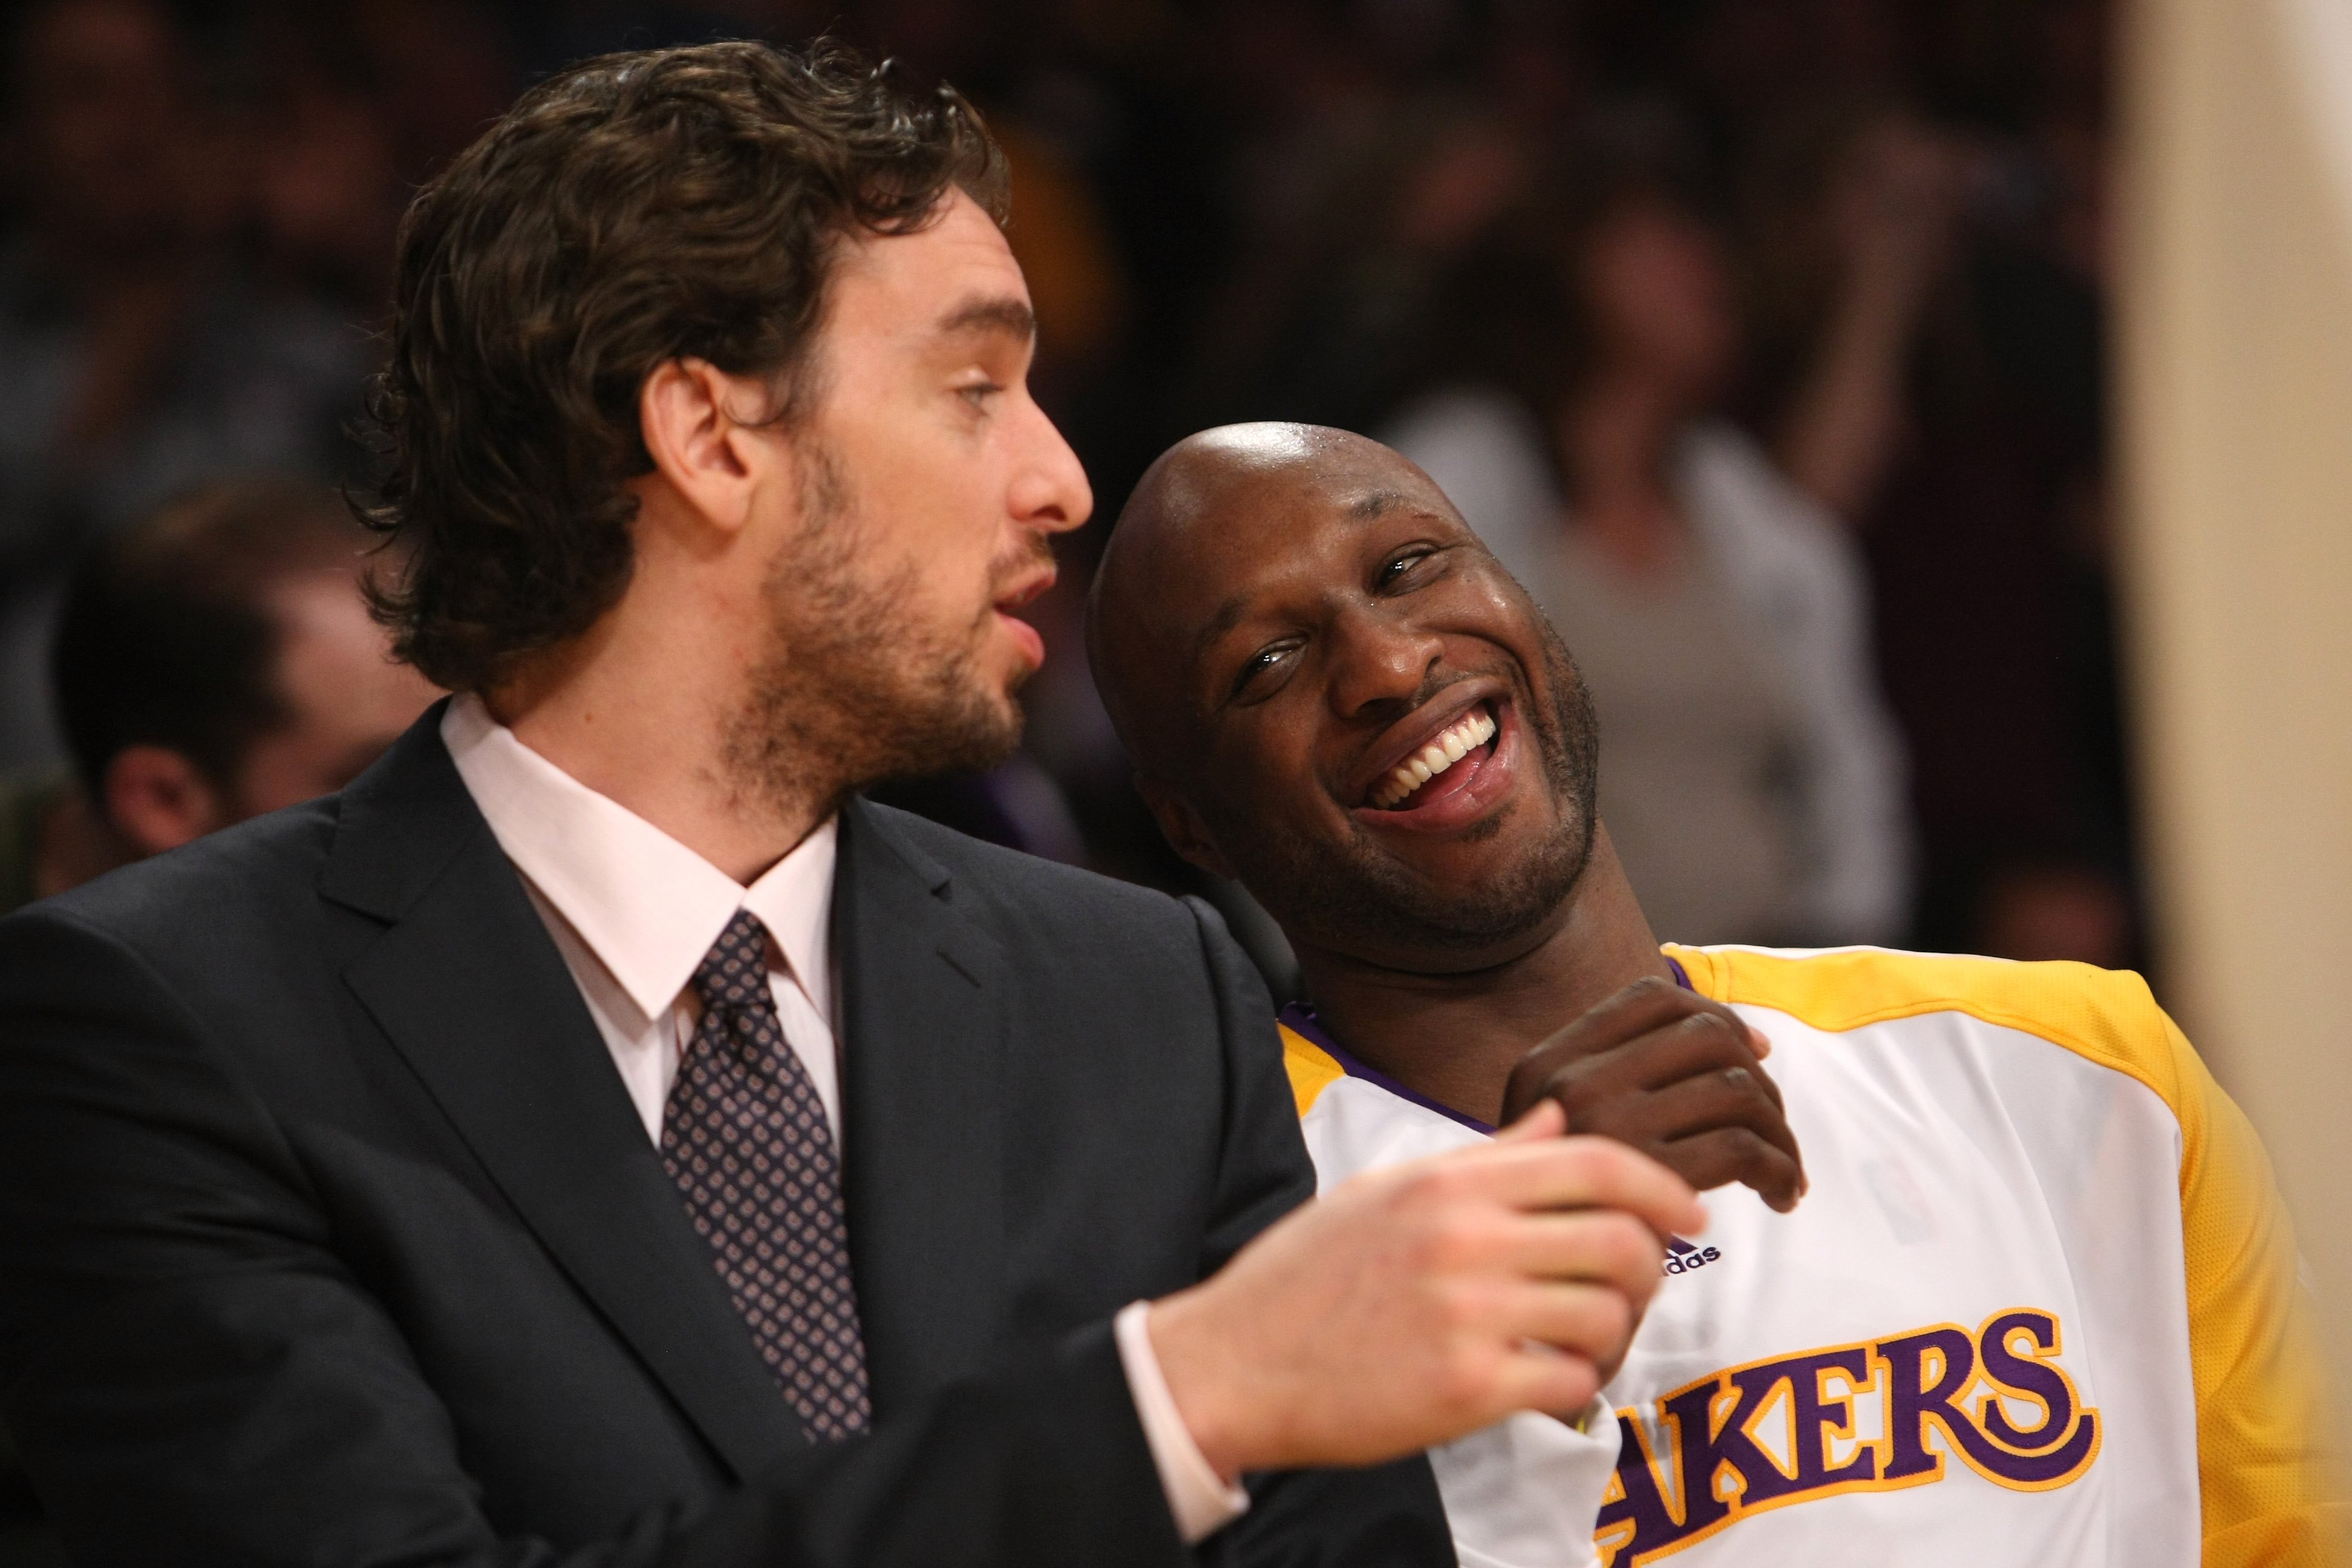 LOS ANGELES, CA - NOVEMBER 08:  Lamar Odom #7 of the Los Angeles Lakers jokes on the bench with injured teammate Pau Gasol #16 in the game with the New Orleans Hornets on November 8, 2009 at Staples Center in Los Angeles, California. The Lakers won 104-88